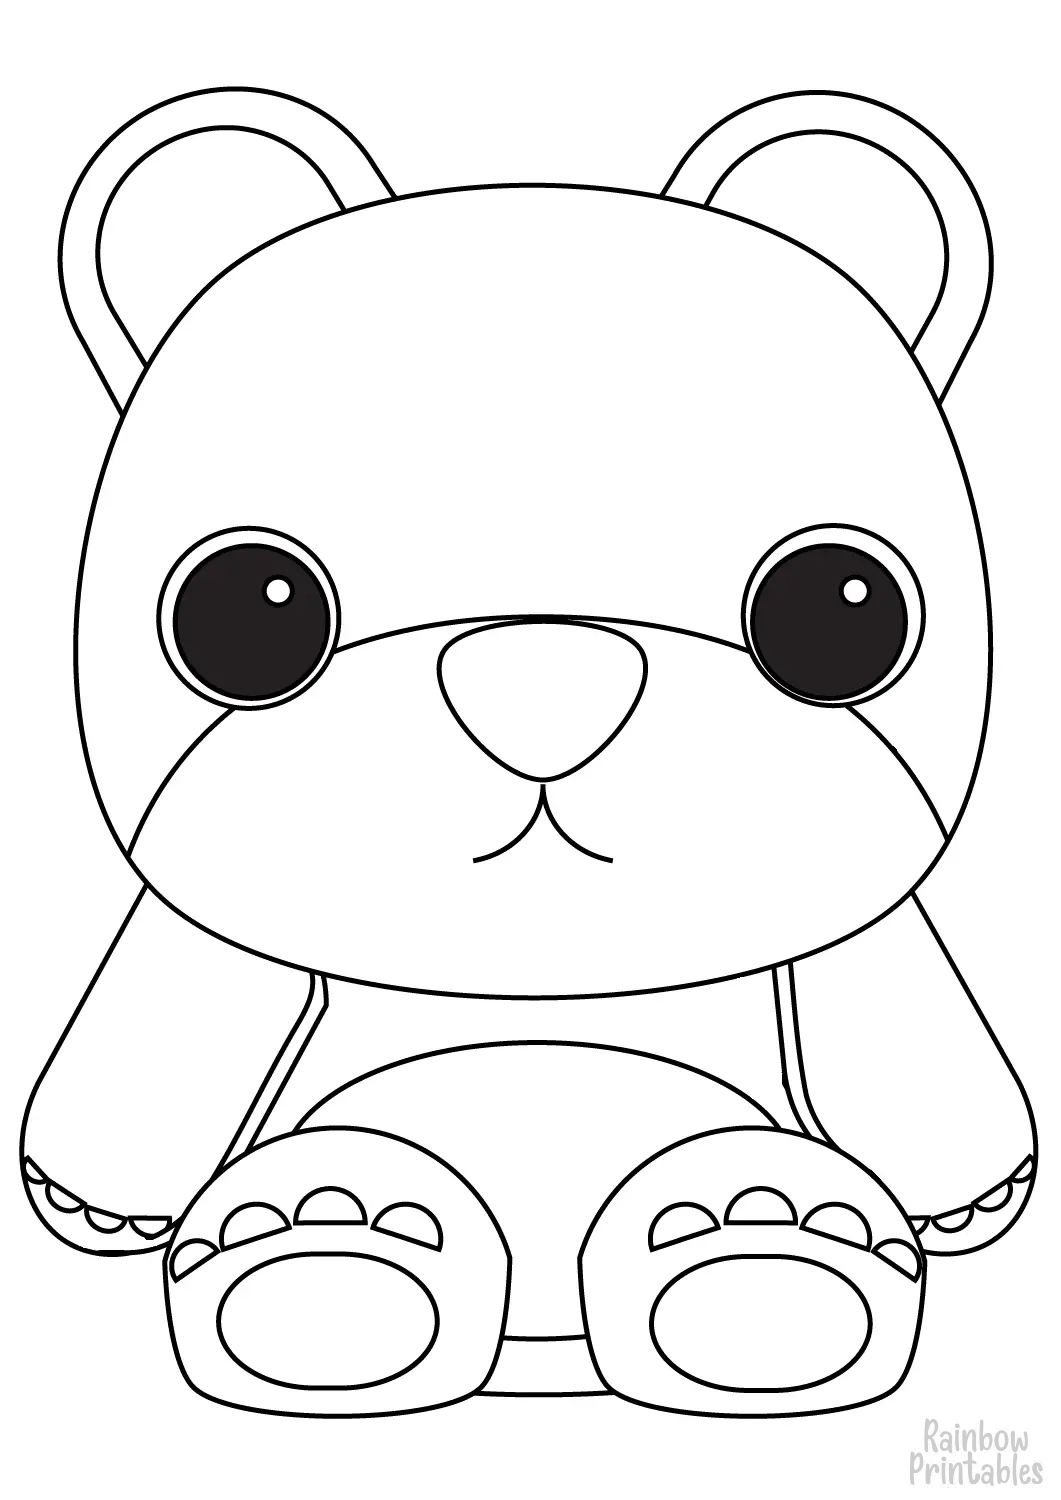 STUFFED TEDDY BEAR TOY Clipart Coloring Pages for Kids Adults Art Activities Line Art